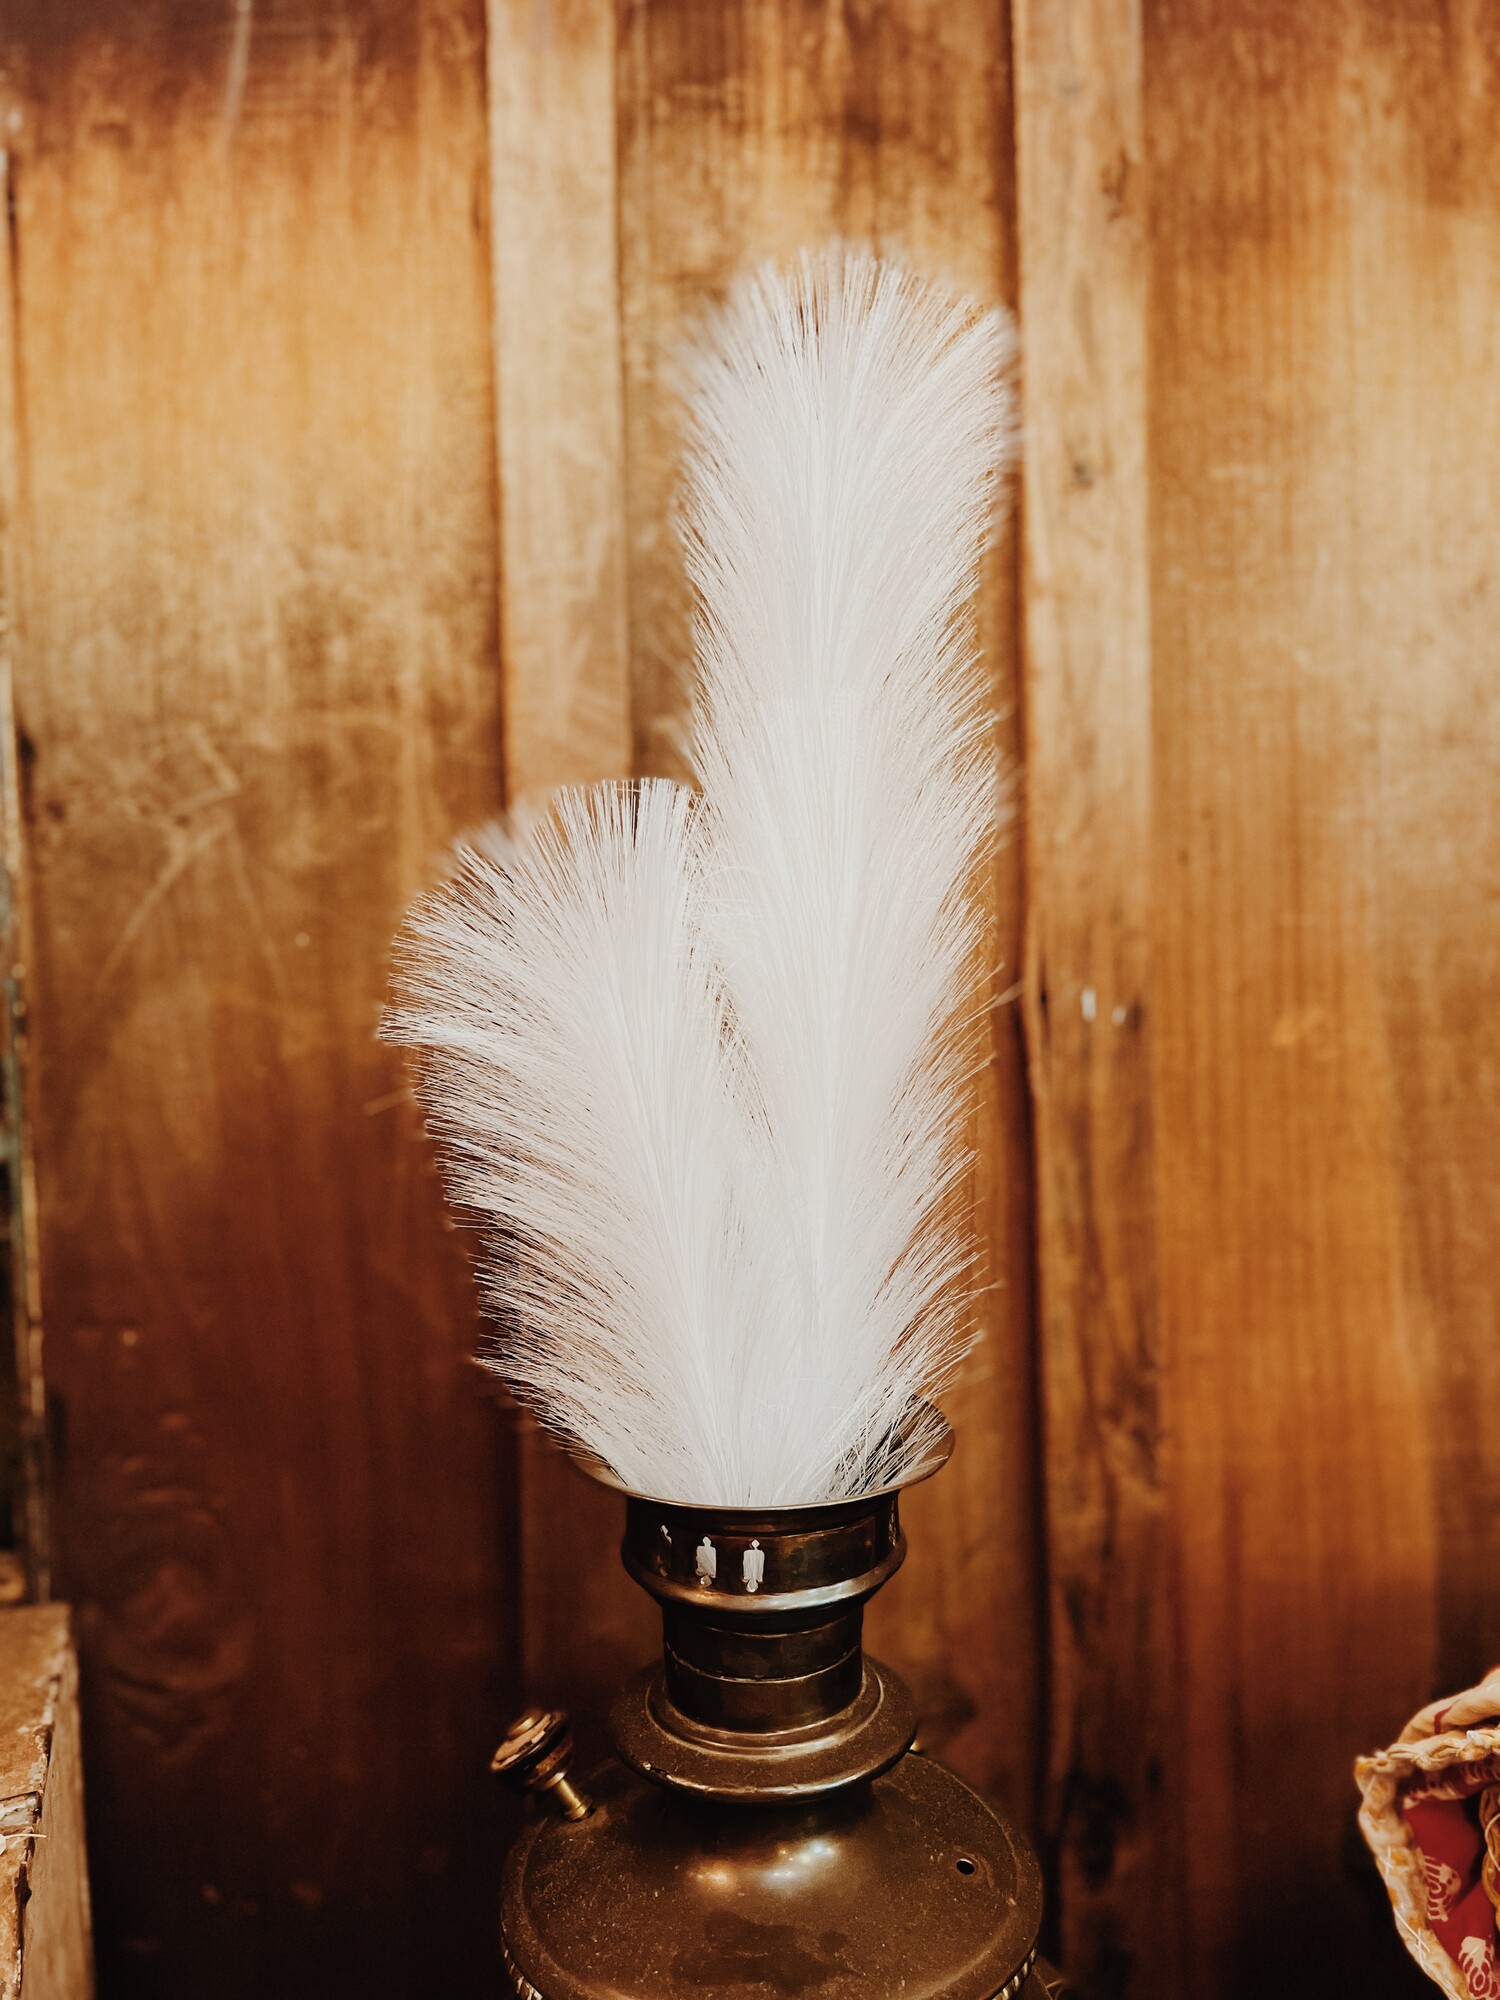 These gorgeous white colored pampas stems are perfect for weddings, parties, or even photography! The clean tone is such an elegant pampas color that makes these florals a beautiful touch to any decor! Each stem measures 27 inches long.